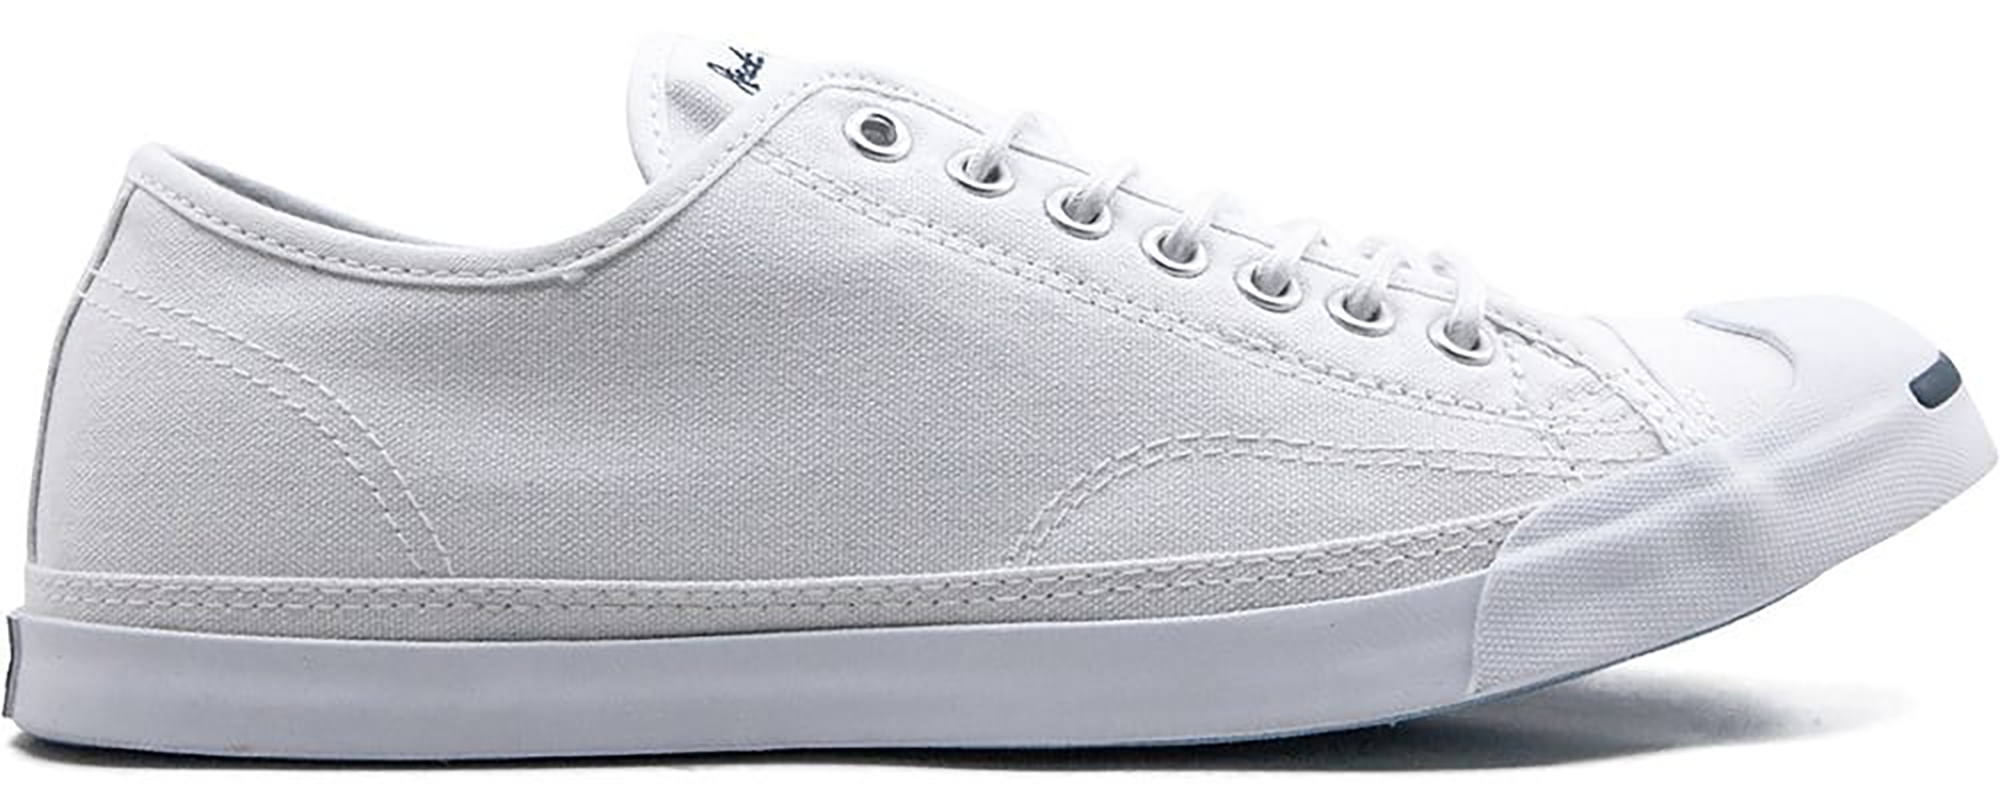 Converse Jack Purcell Low Profile Slip 